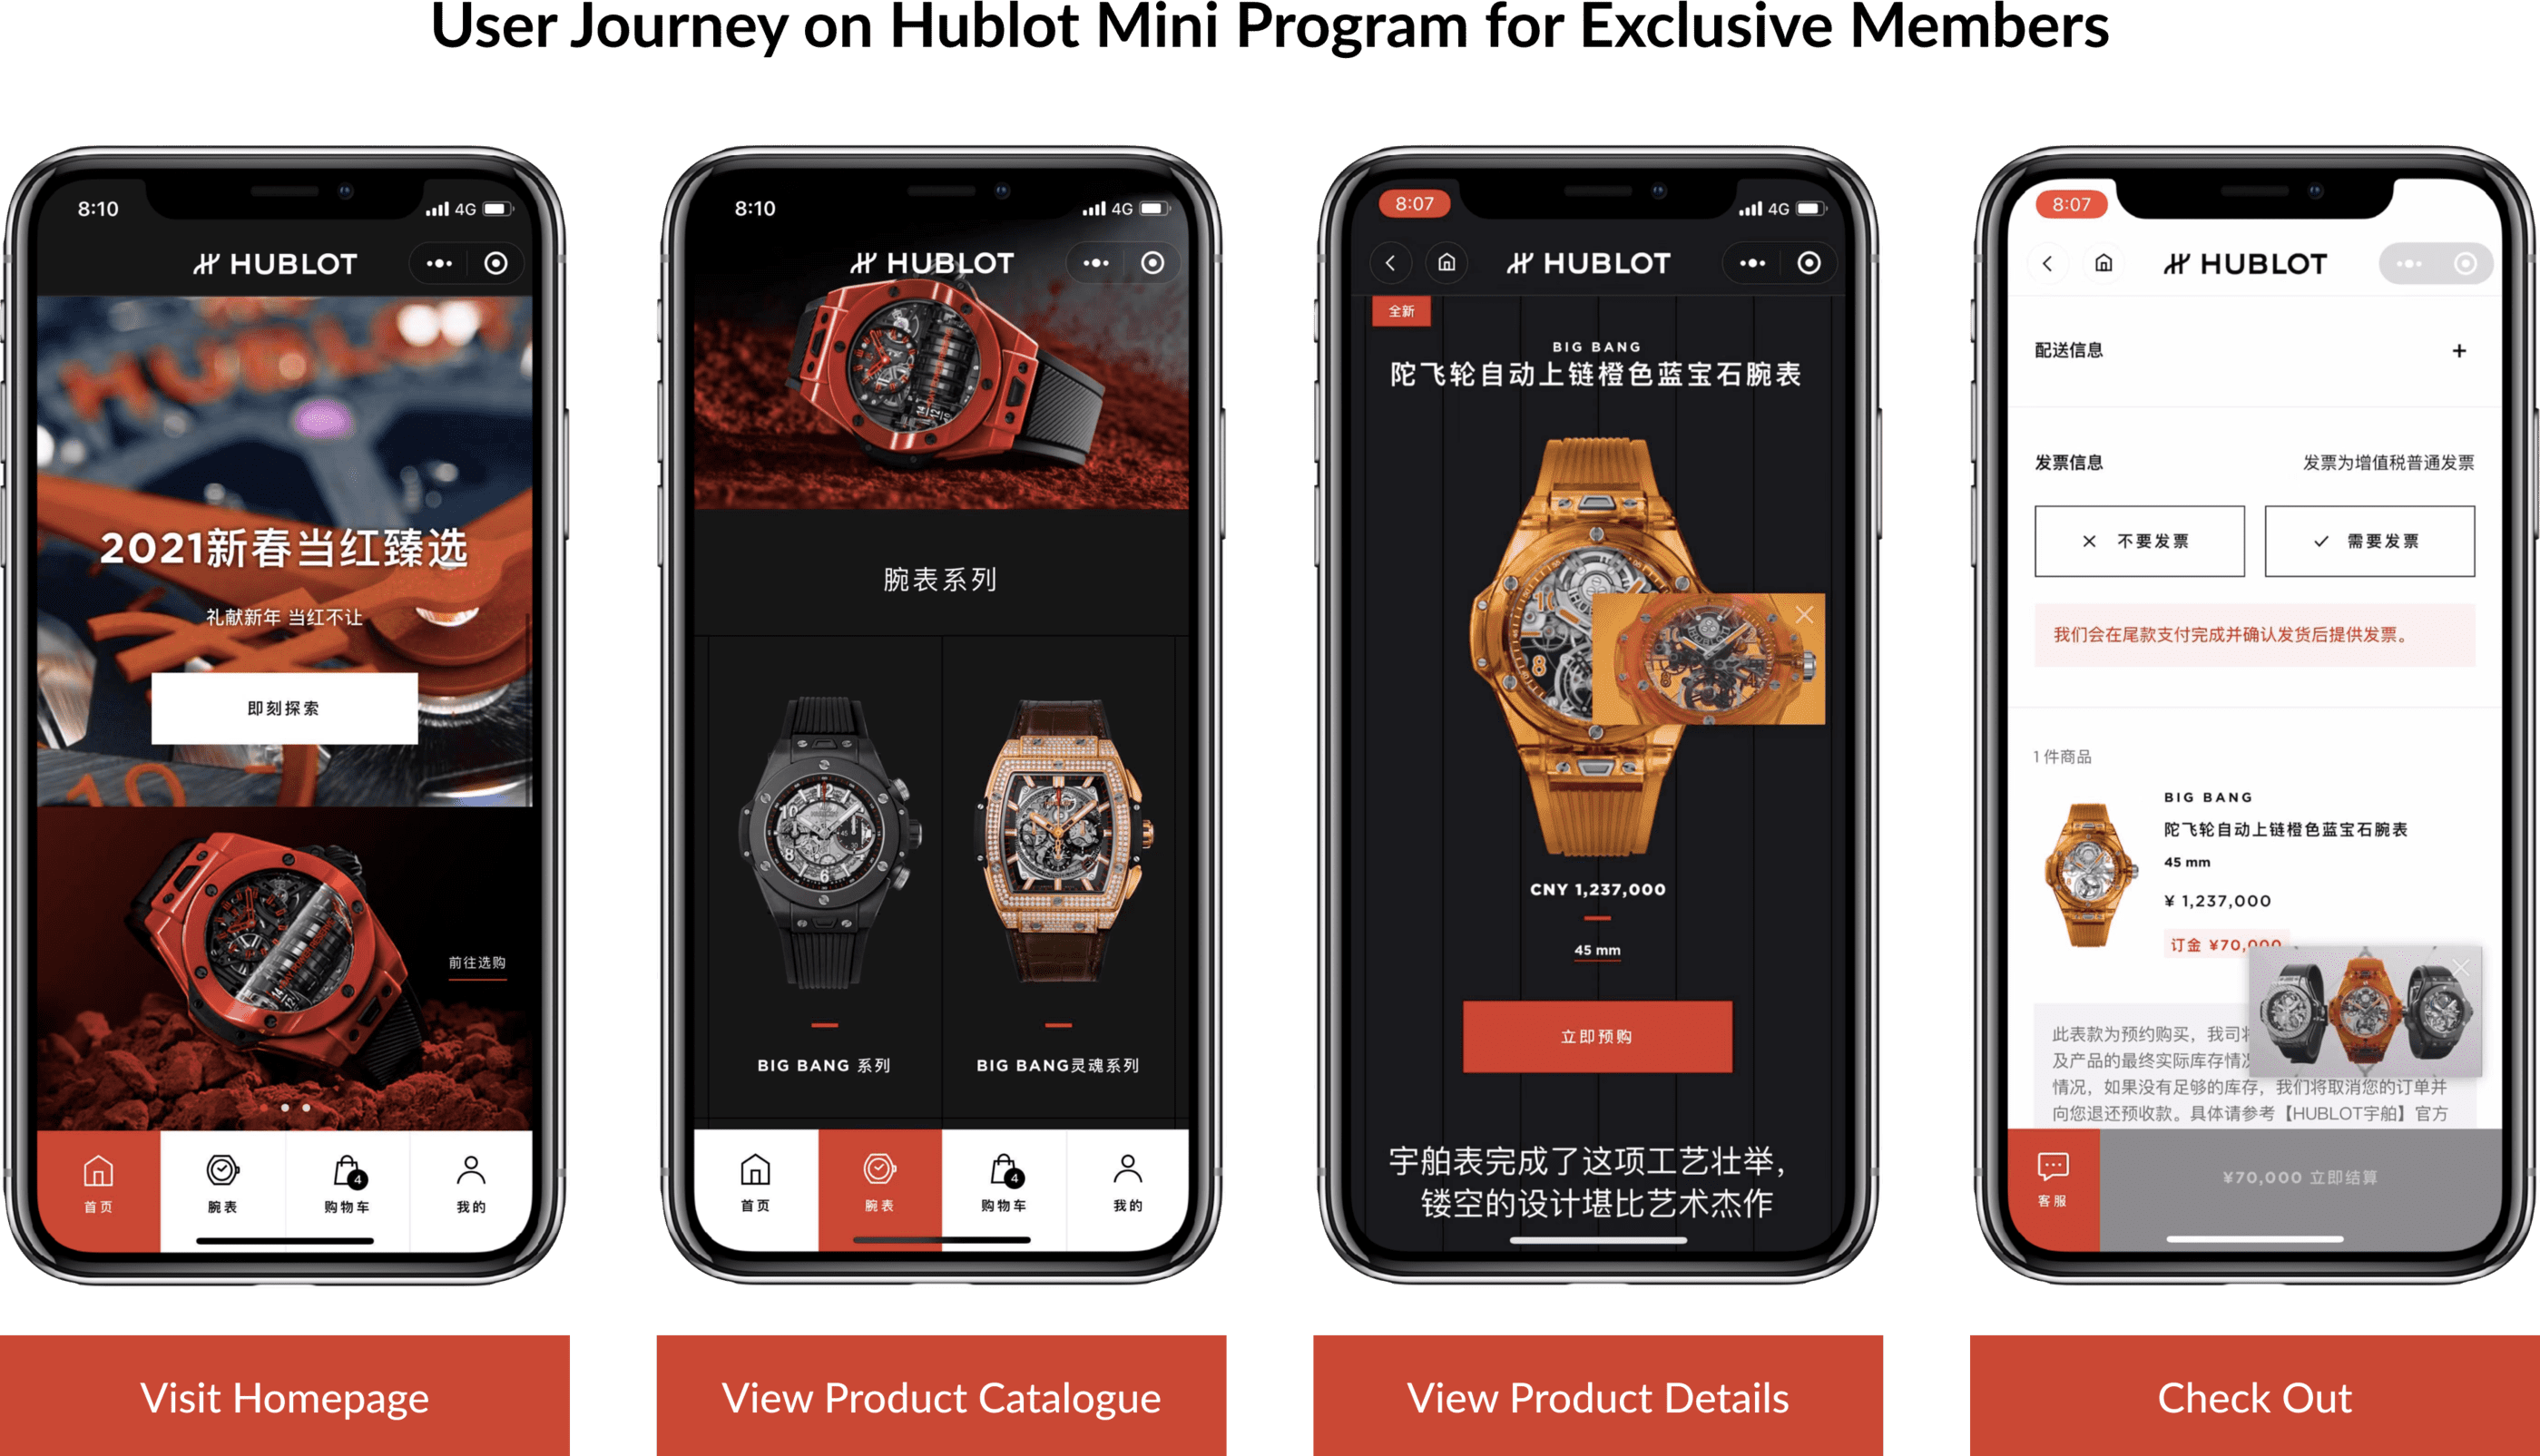 An illustration of the user journey on Hublot Mini program for Exclusive Members. The user visits the homepage, views the product catalogue, views the product details, and, finally, checks out.